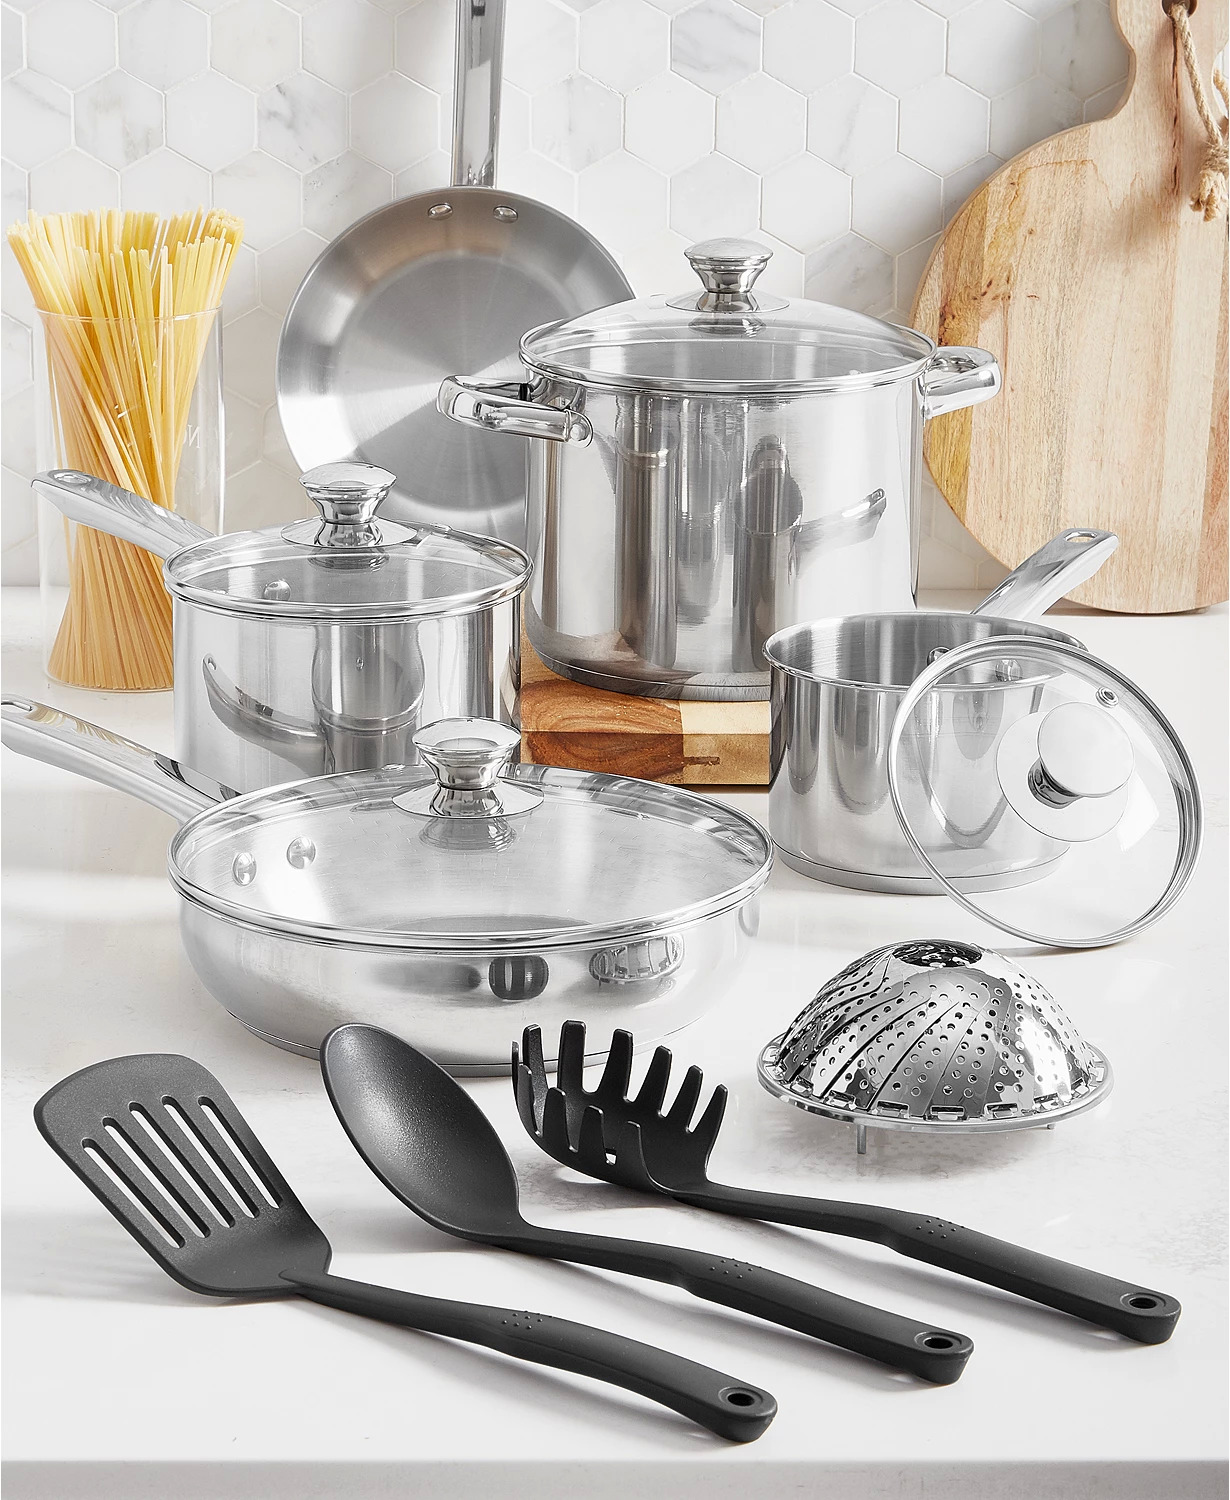 Stainless Steel 13-Pc. Cookware Set for $29.99